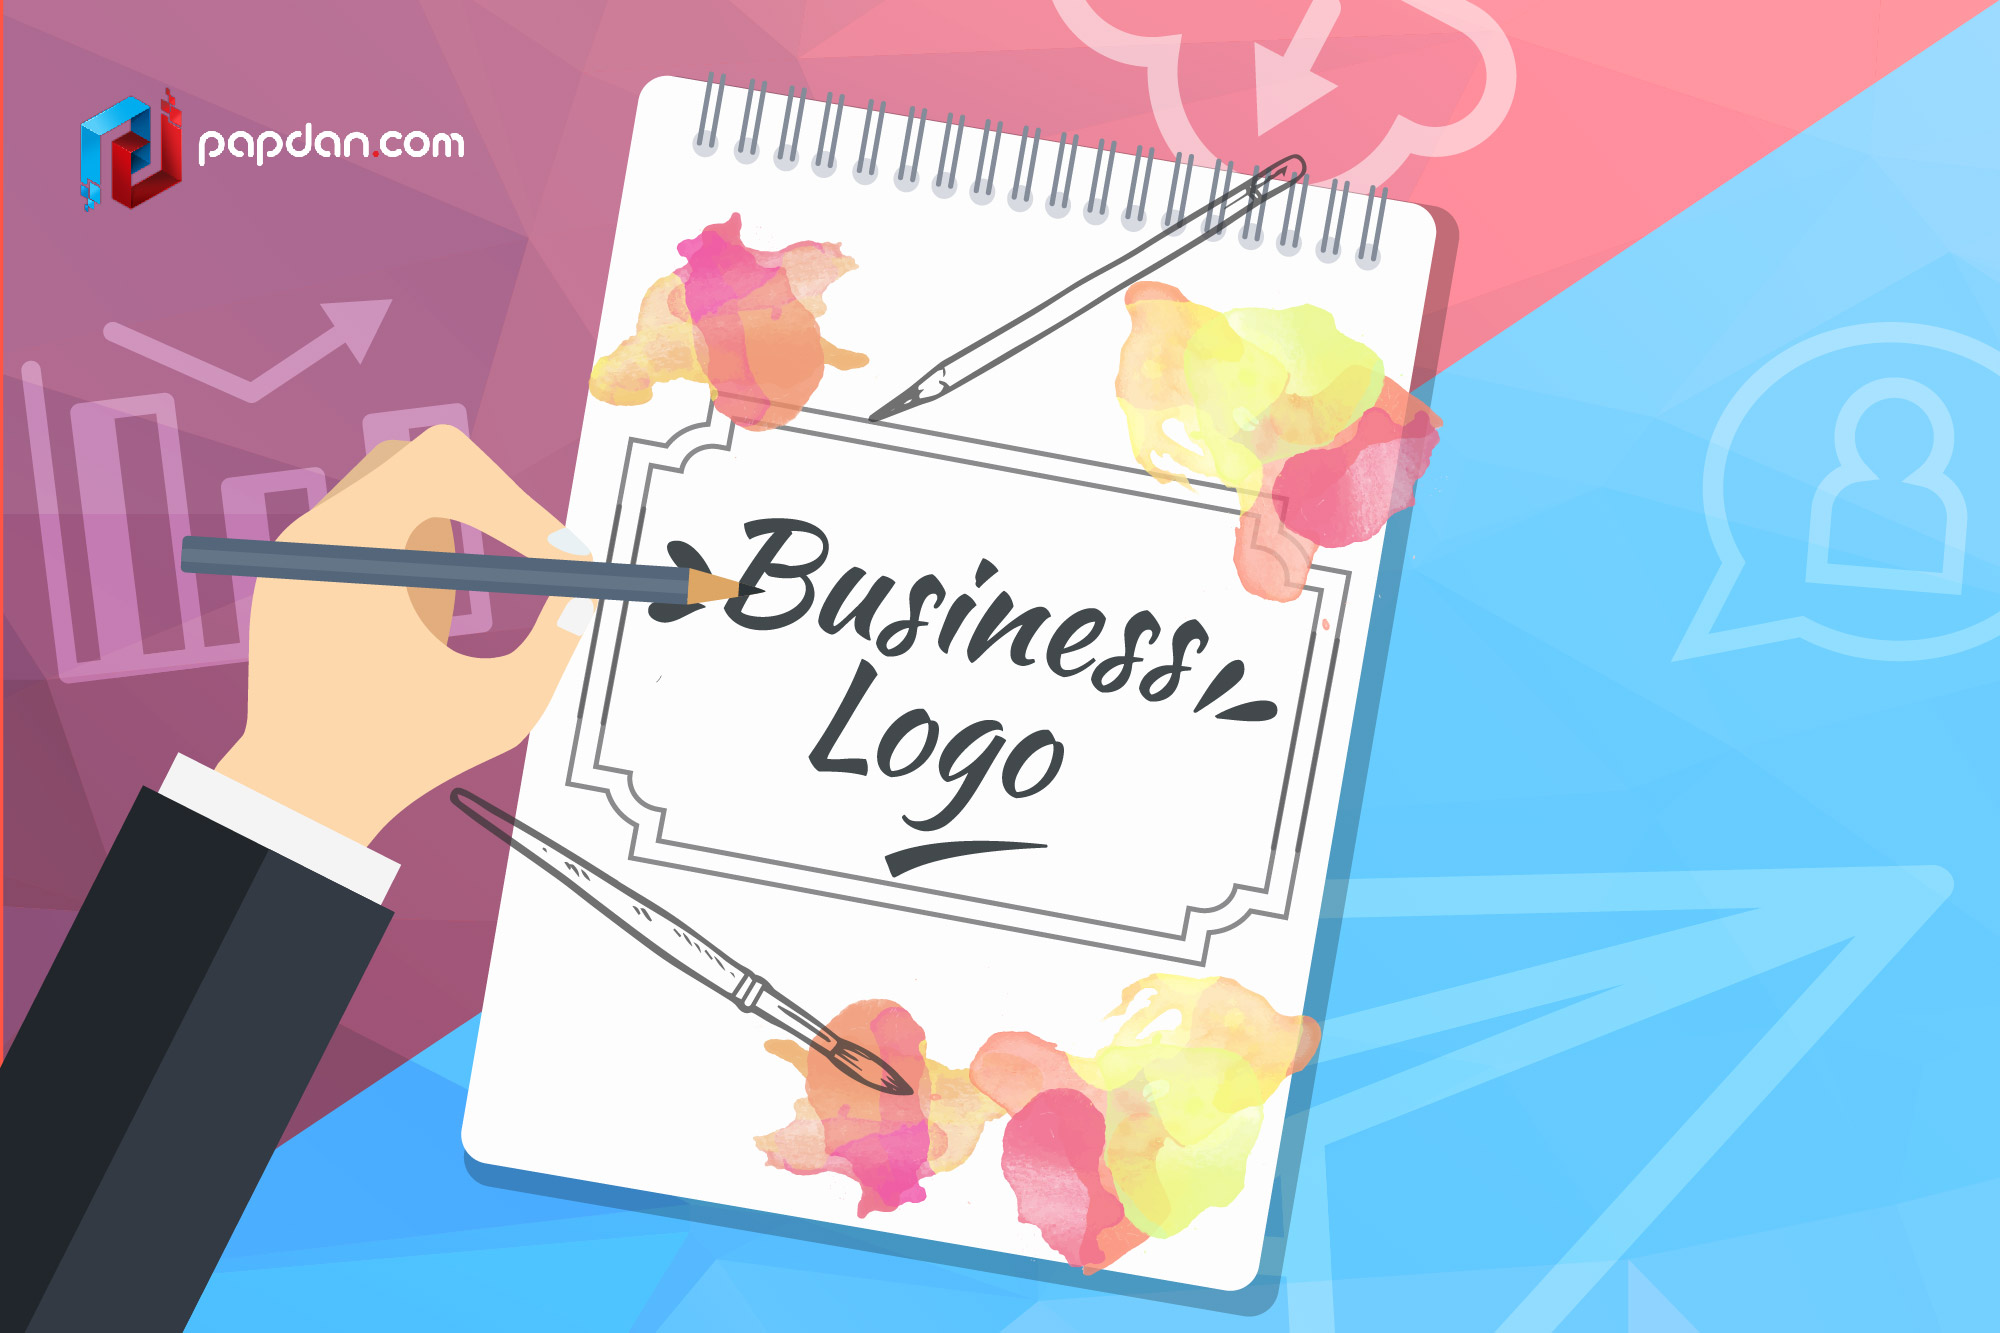 Why Does Your Business Need a Good Logo?